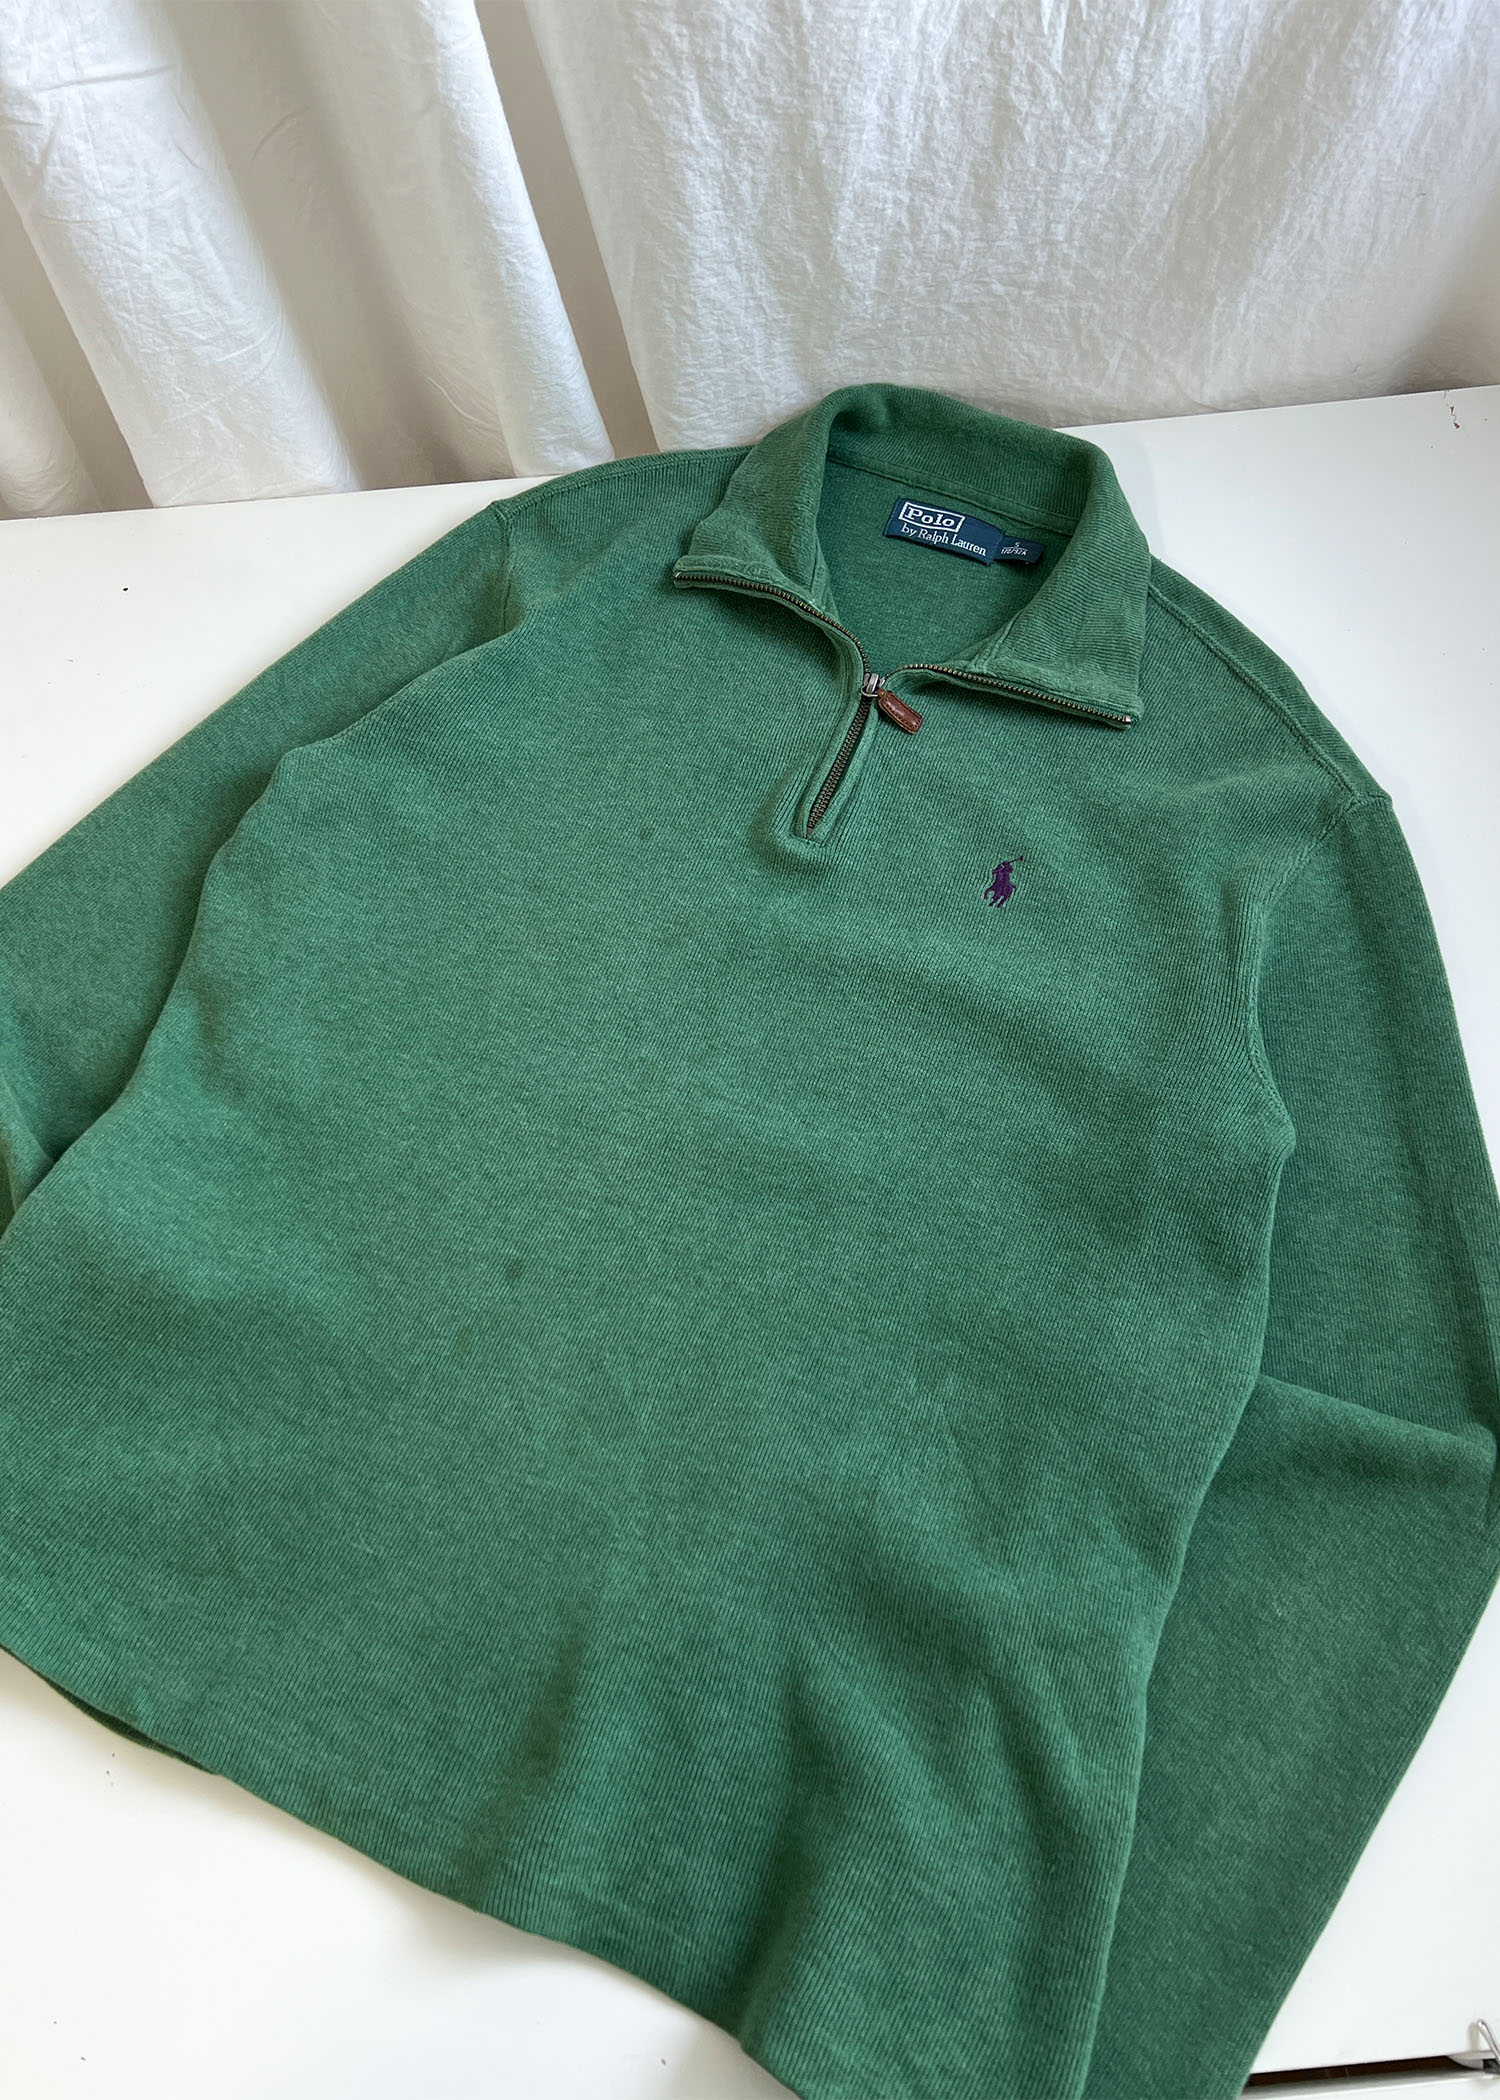 Polo by Ralph Lauren pullover knit